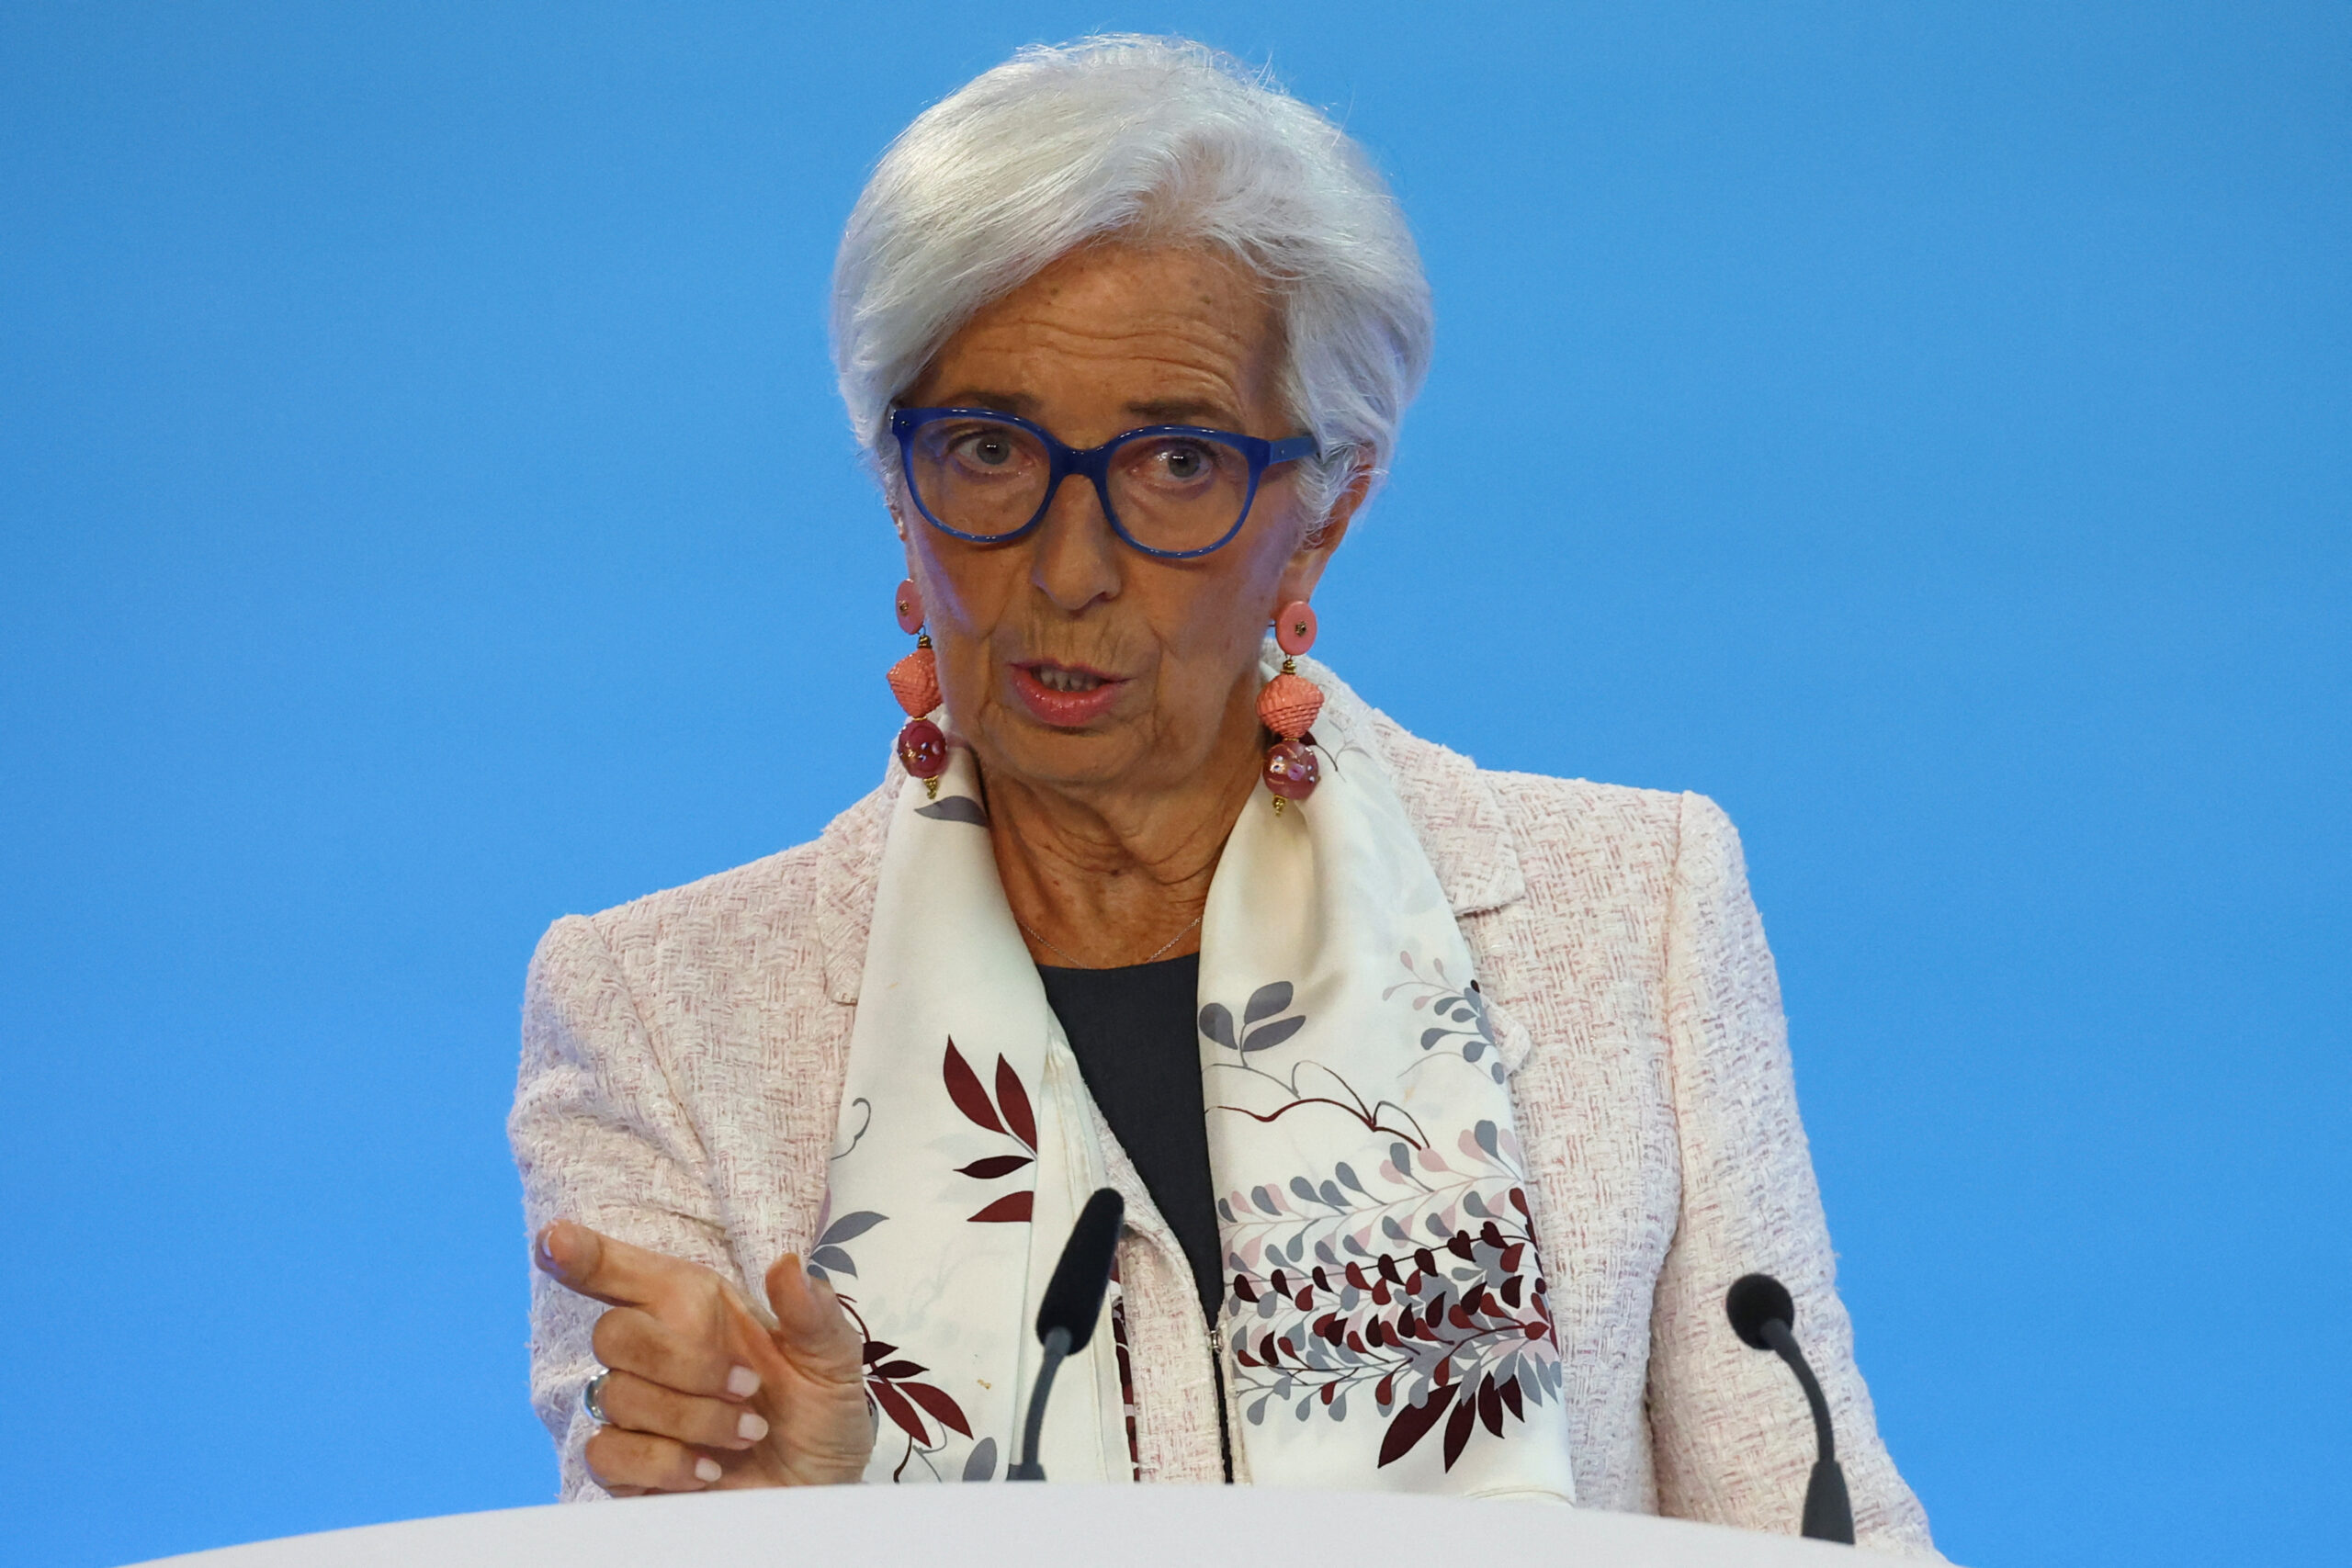 ECB President Christine Lagarde says profound changes in how the global economy operates could create greater inflation volatility.